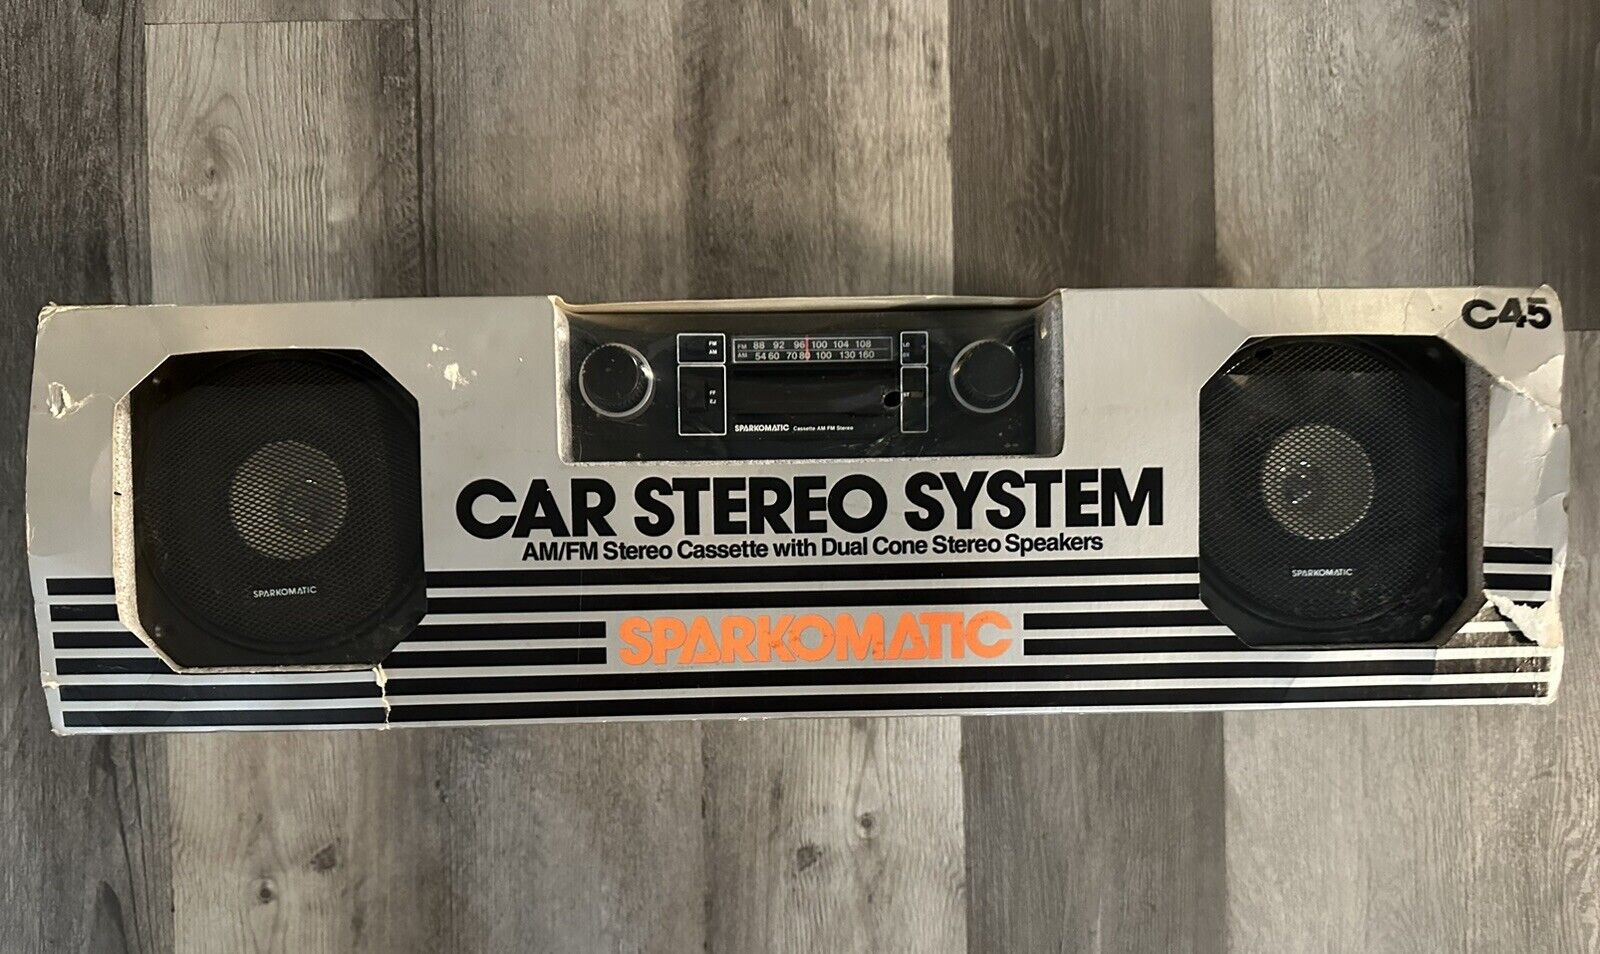 SPARKOMATIC Vintage Complete Car Stereo System Cassette Player Factory Sealed